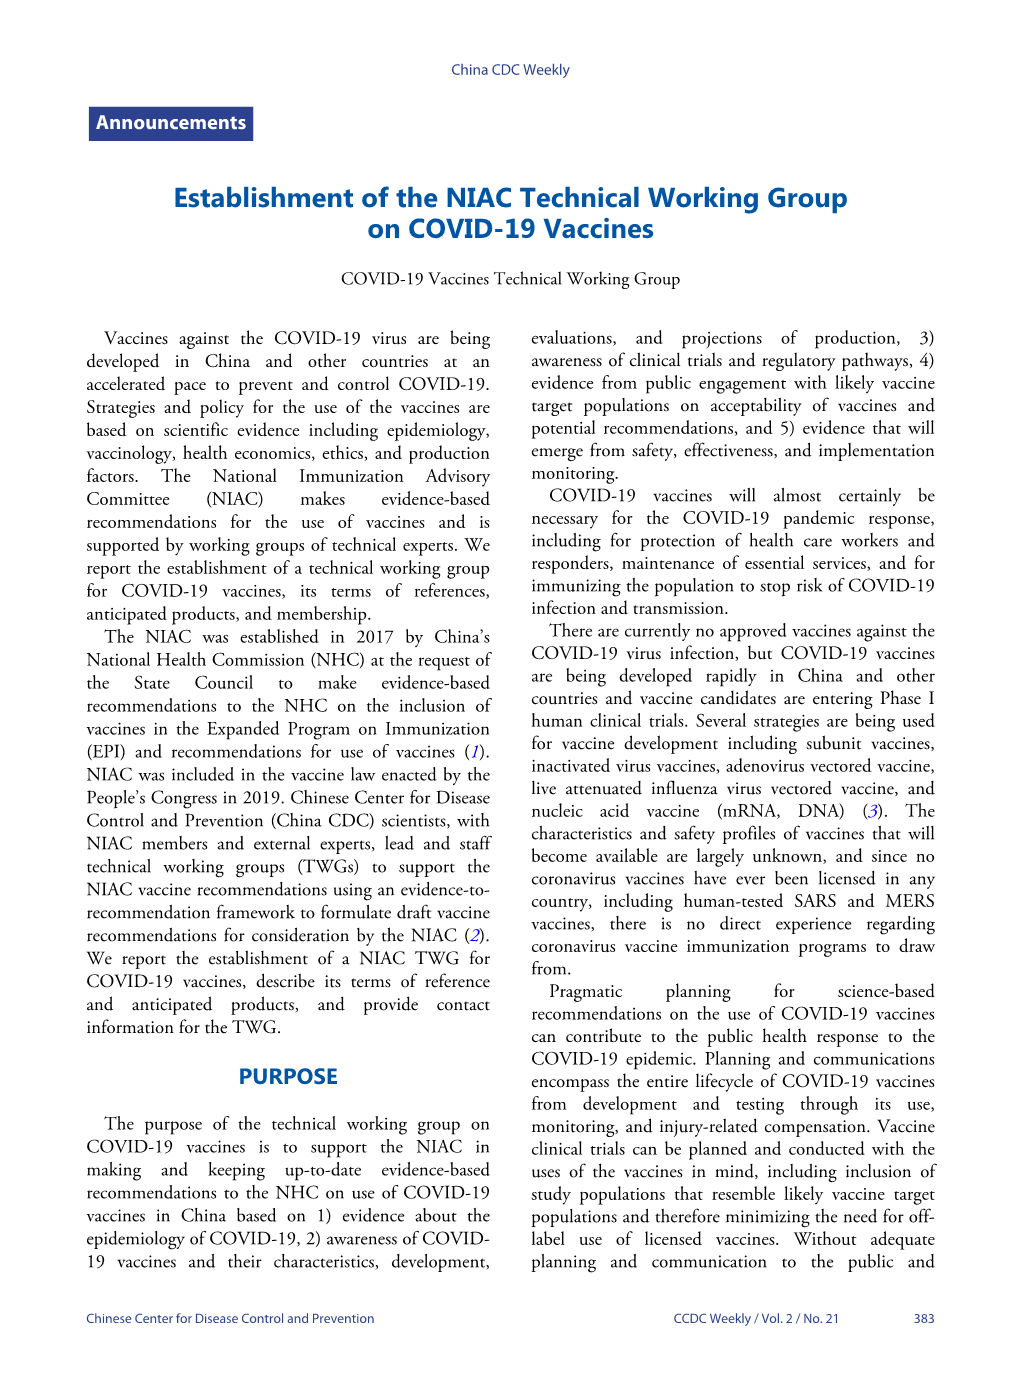 Establishment of the NIAC Technical Working Group on COVID-19 Vaccines